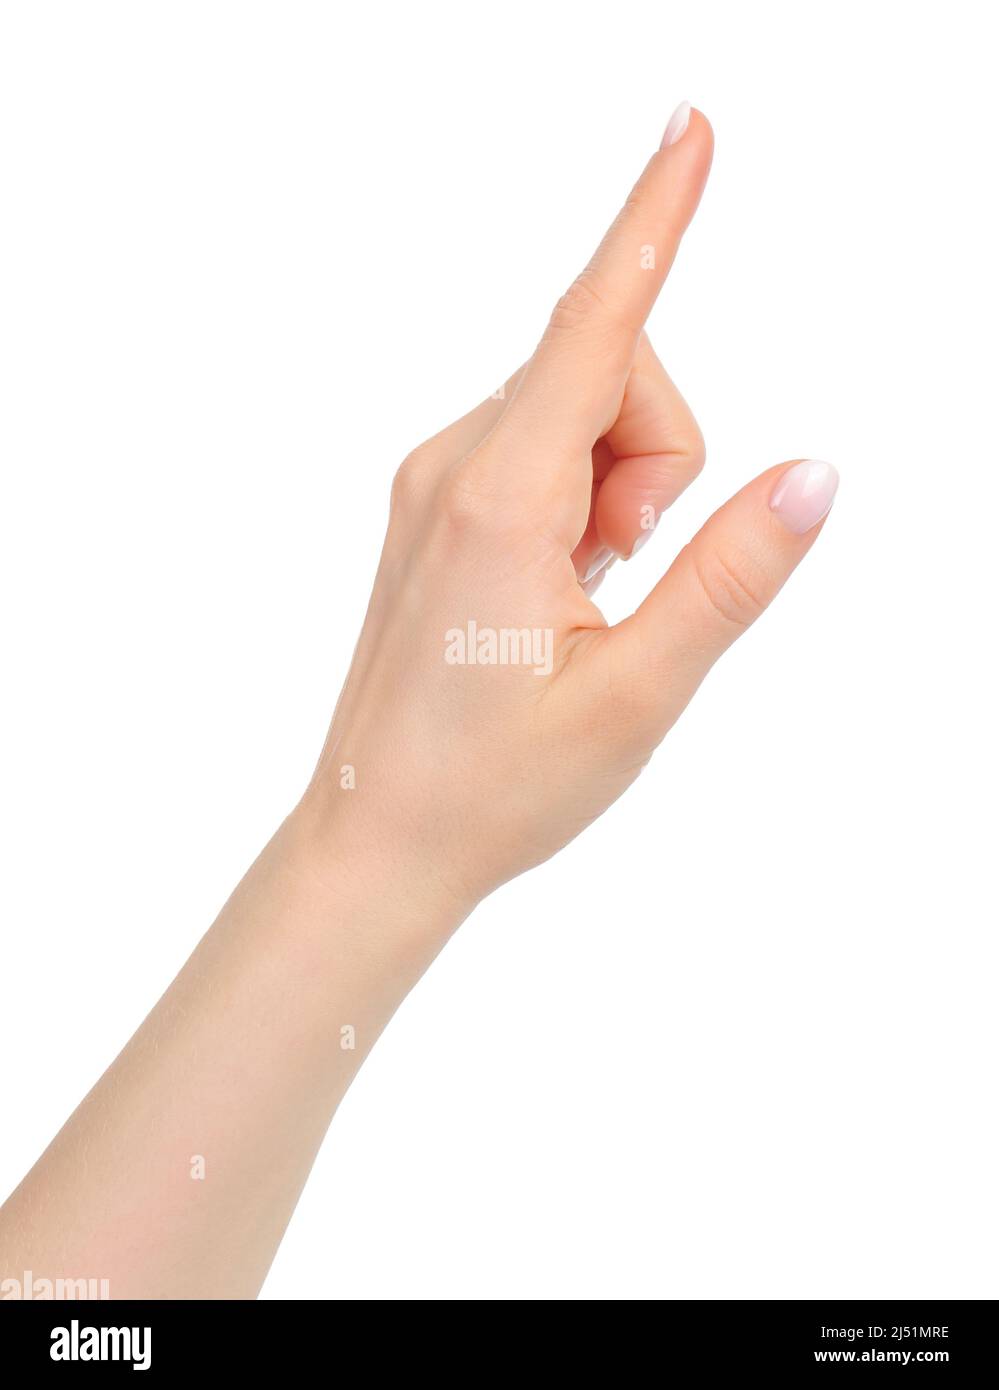 Woman hand on white background close-up Stock Photo